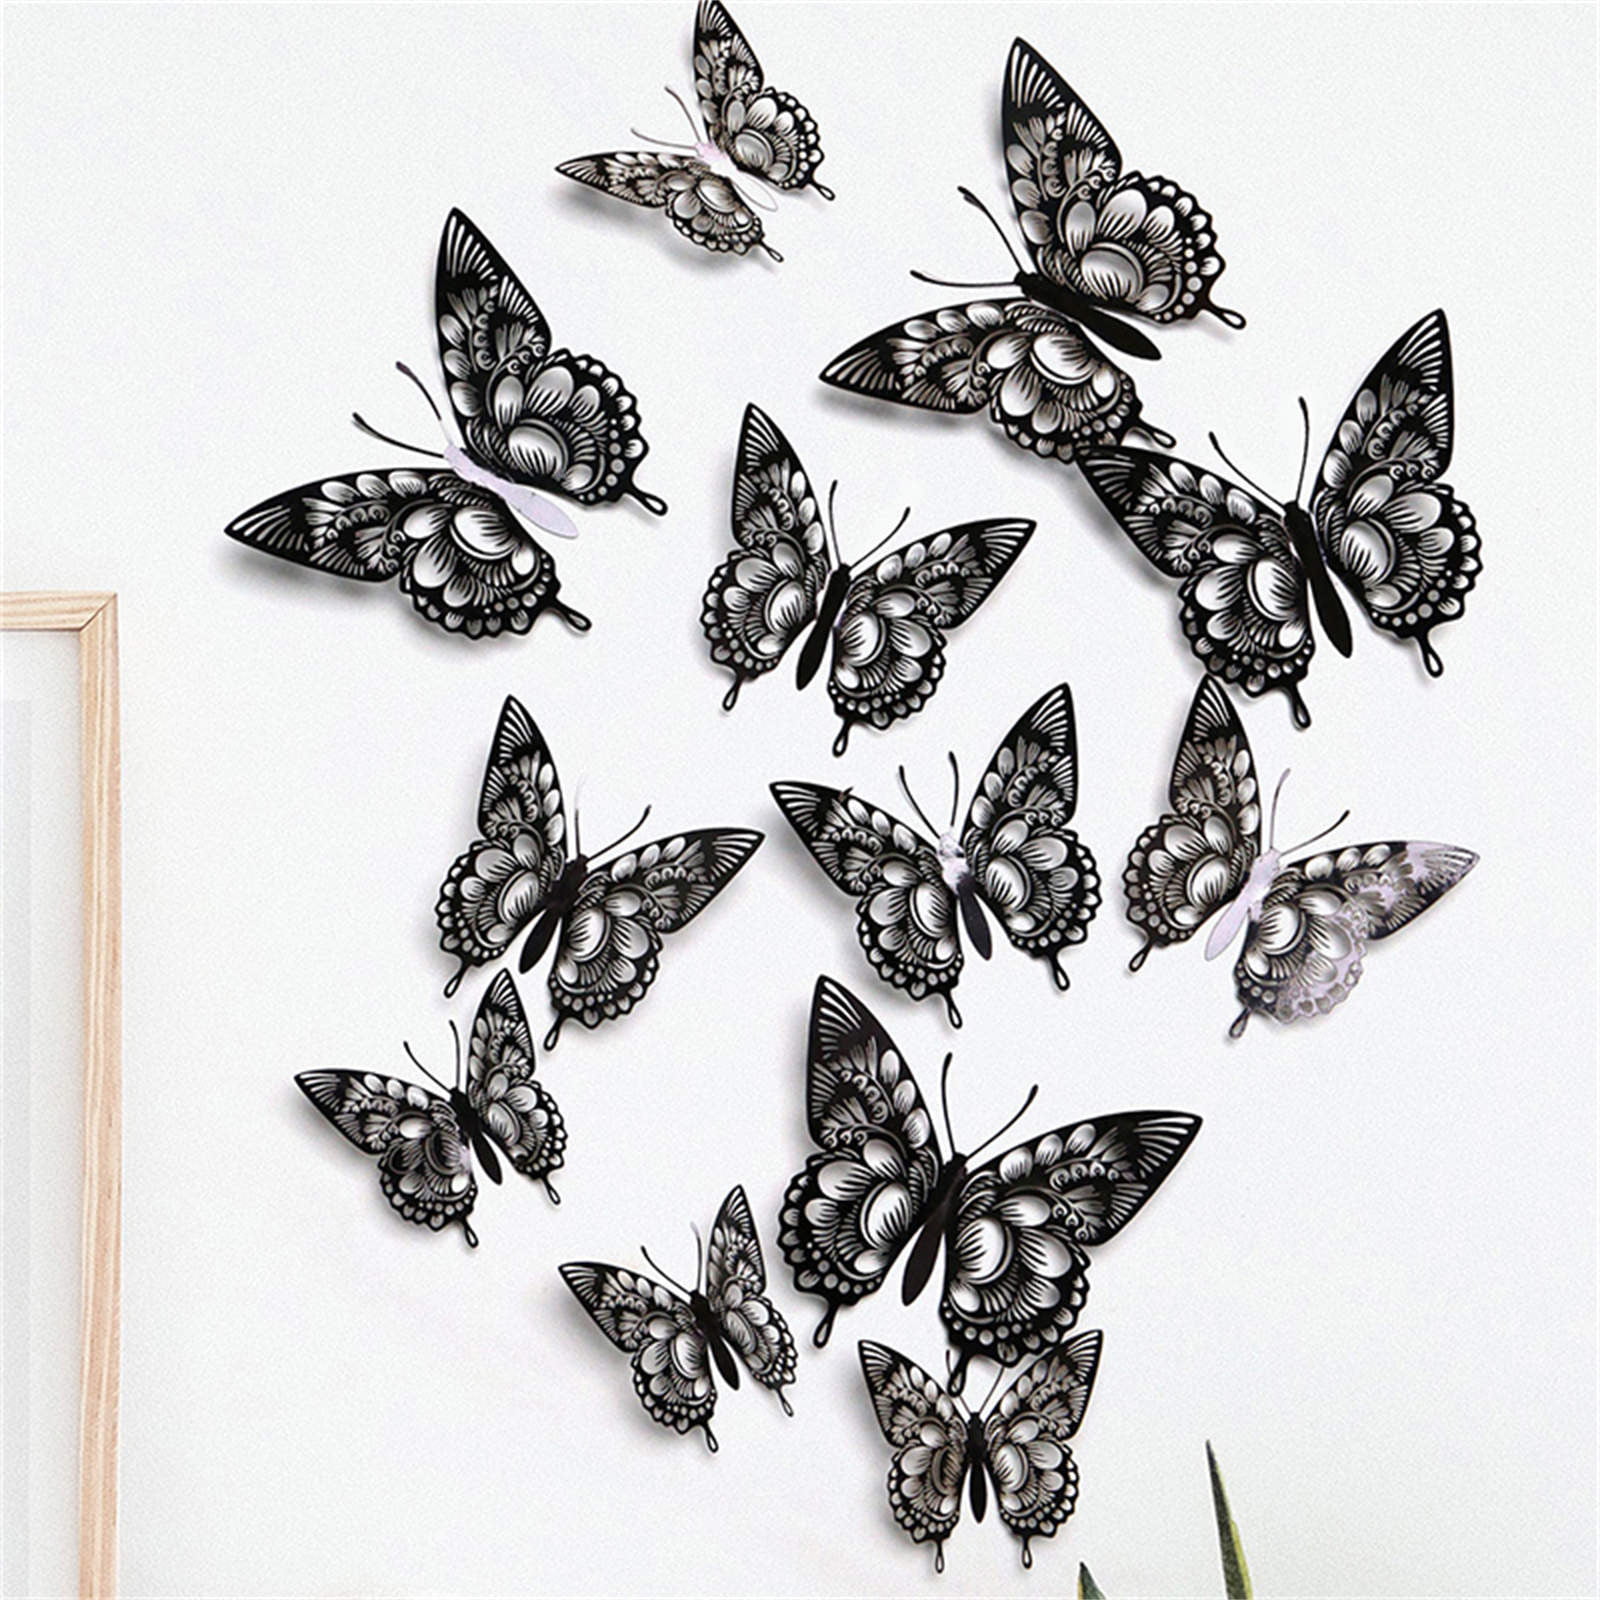 2.5" White Gray Grey Flower Vine Butterfly Embroidery Patch 